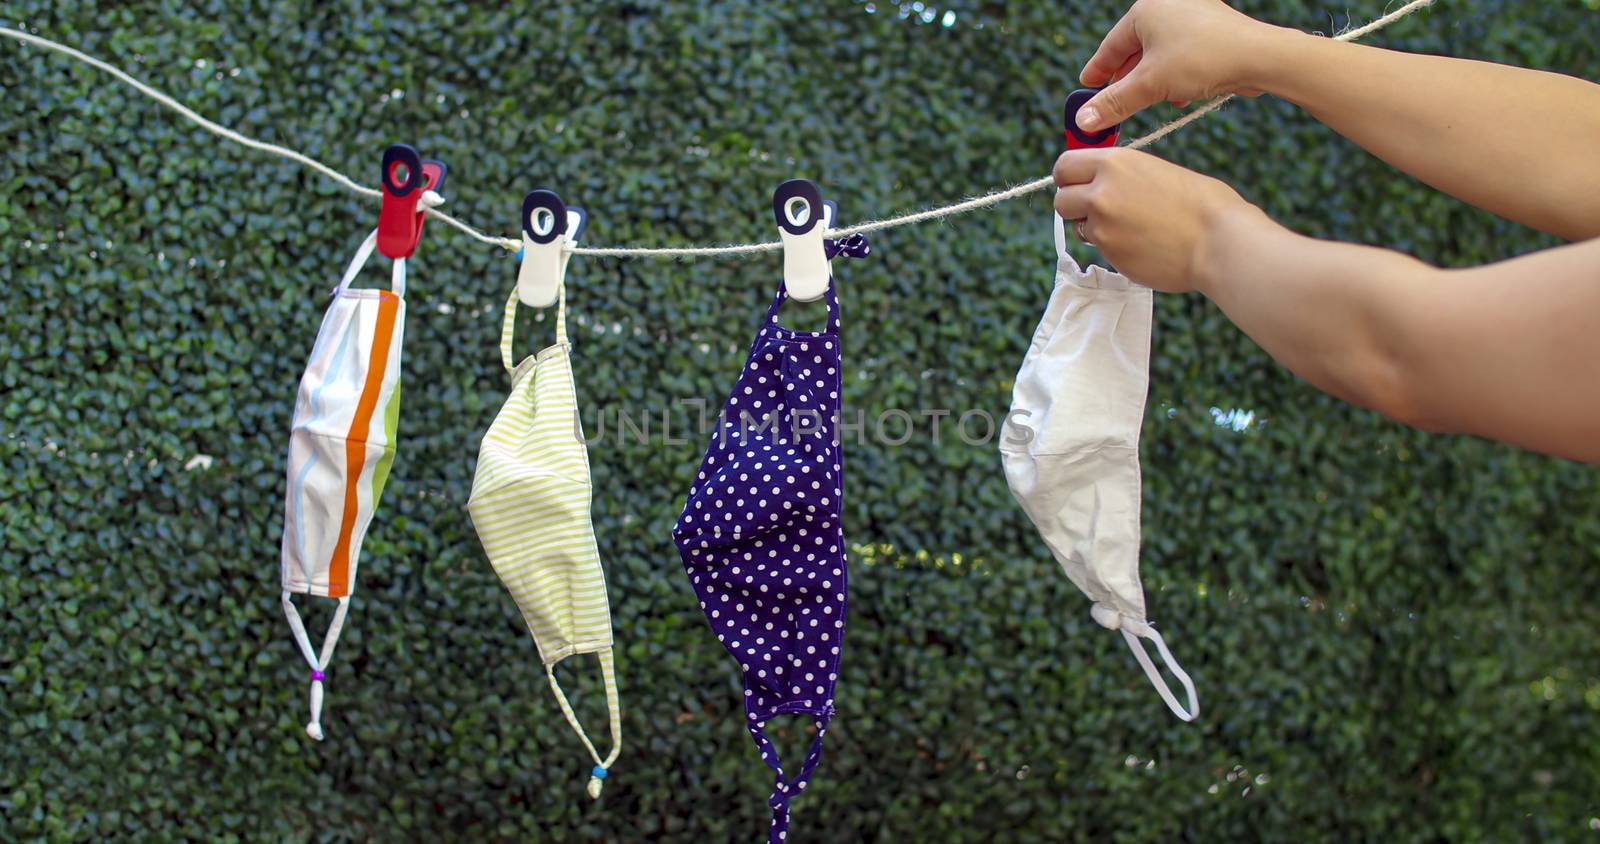 A person Drying outside reusable family face masks, hang on a clothesline nylon rope with clothespins. by oasisamuel